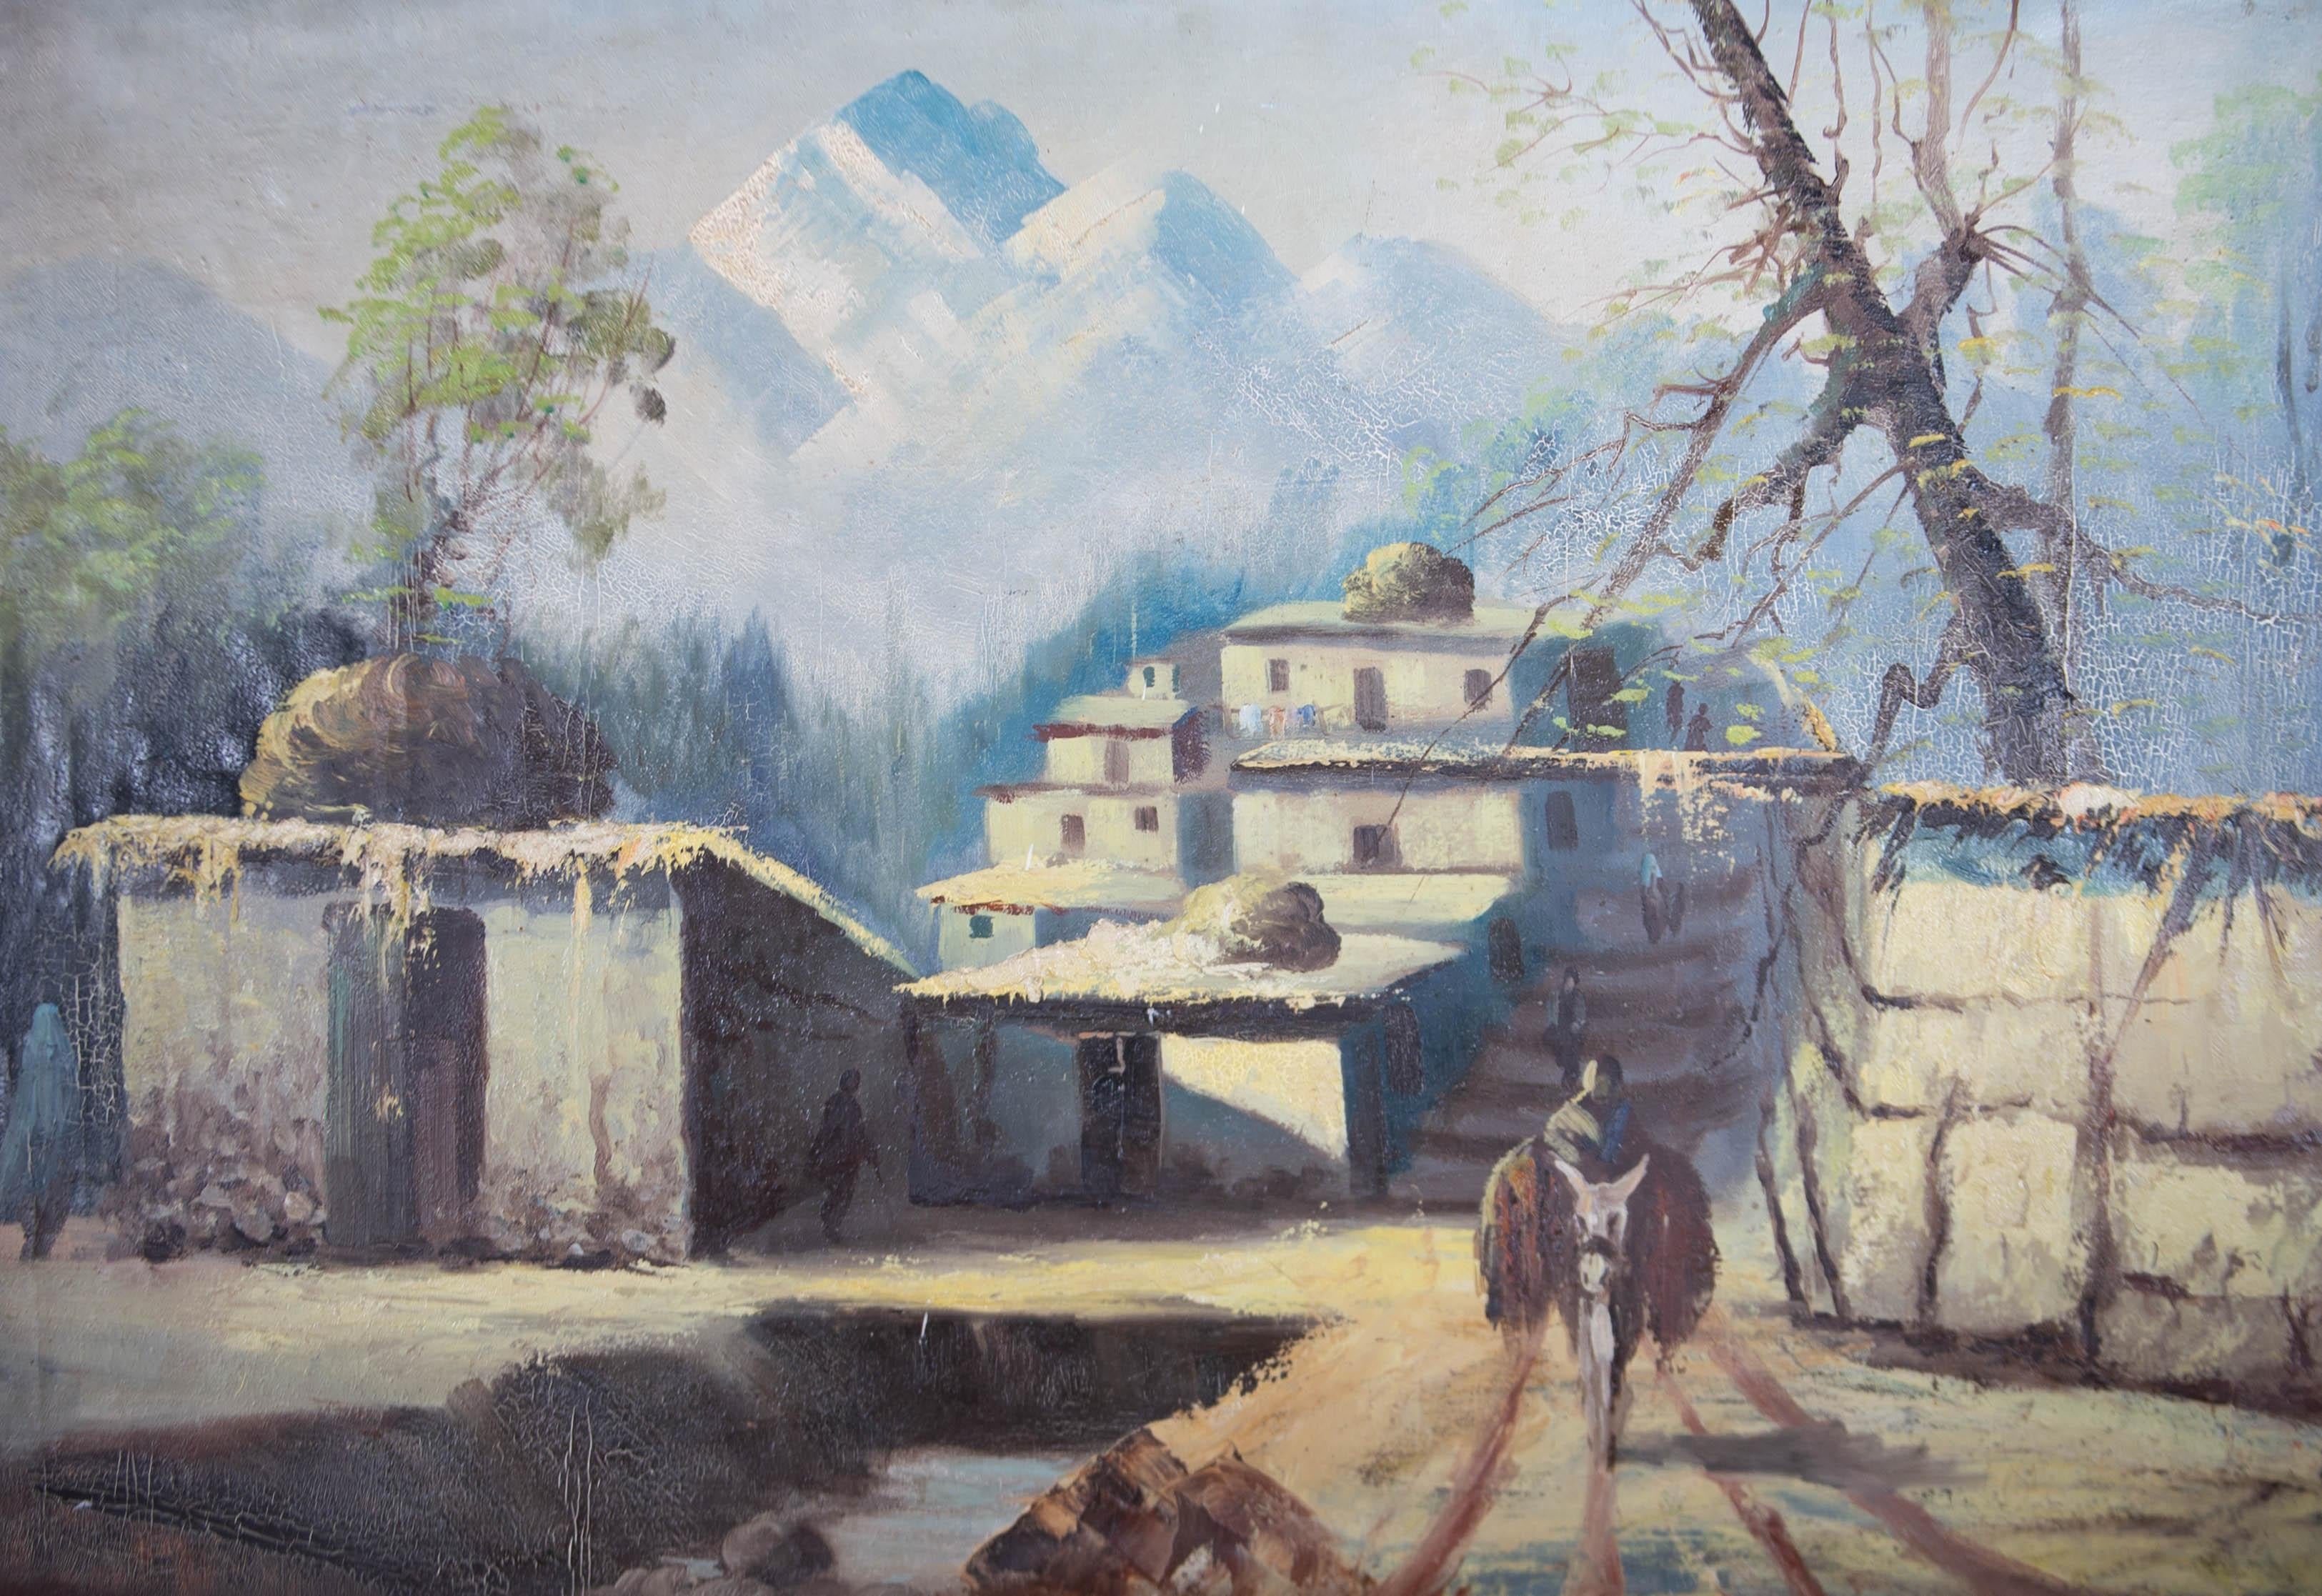 20th Century Oil - Middle Eastern Village Scene - Painting by Unknown